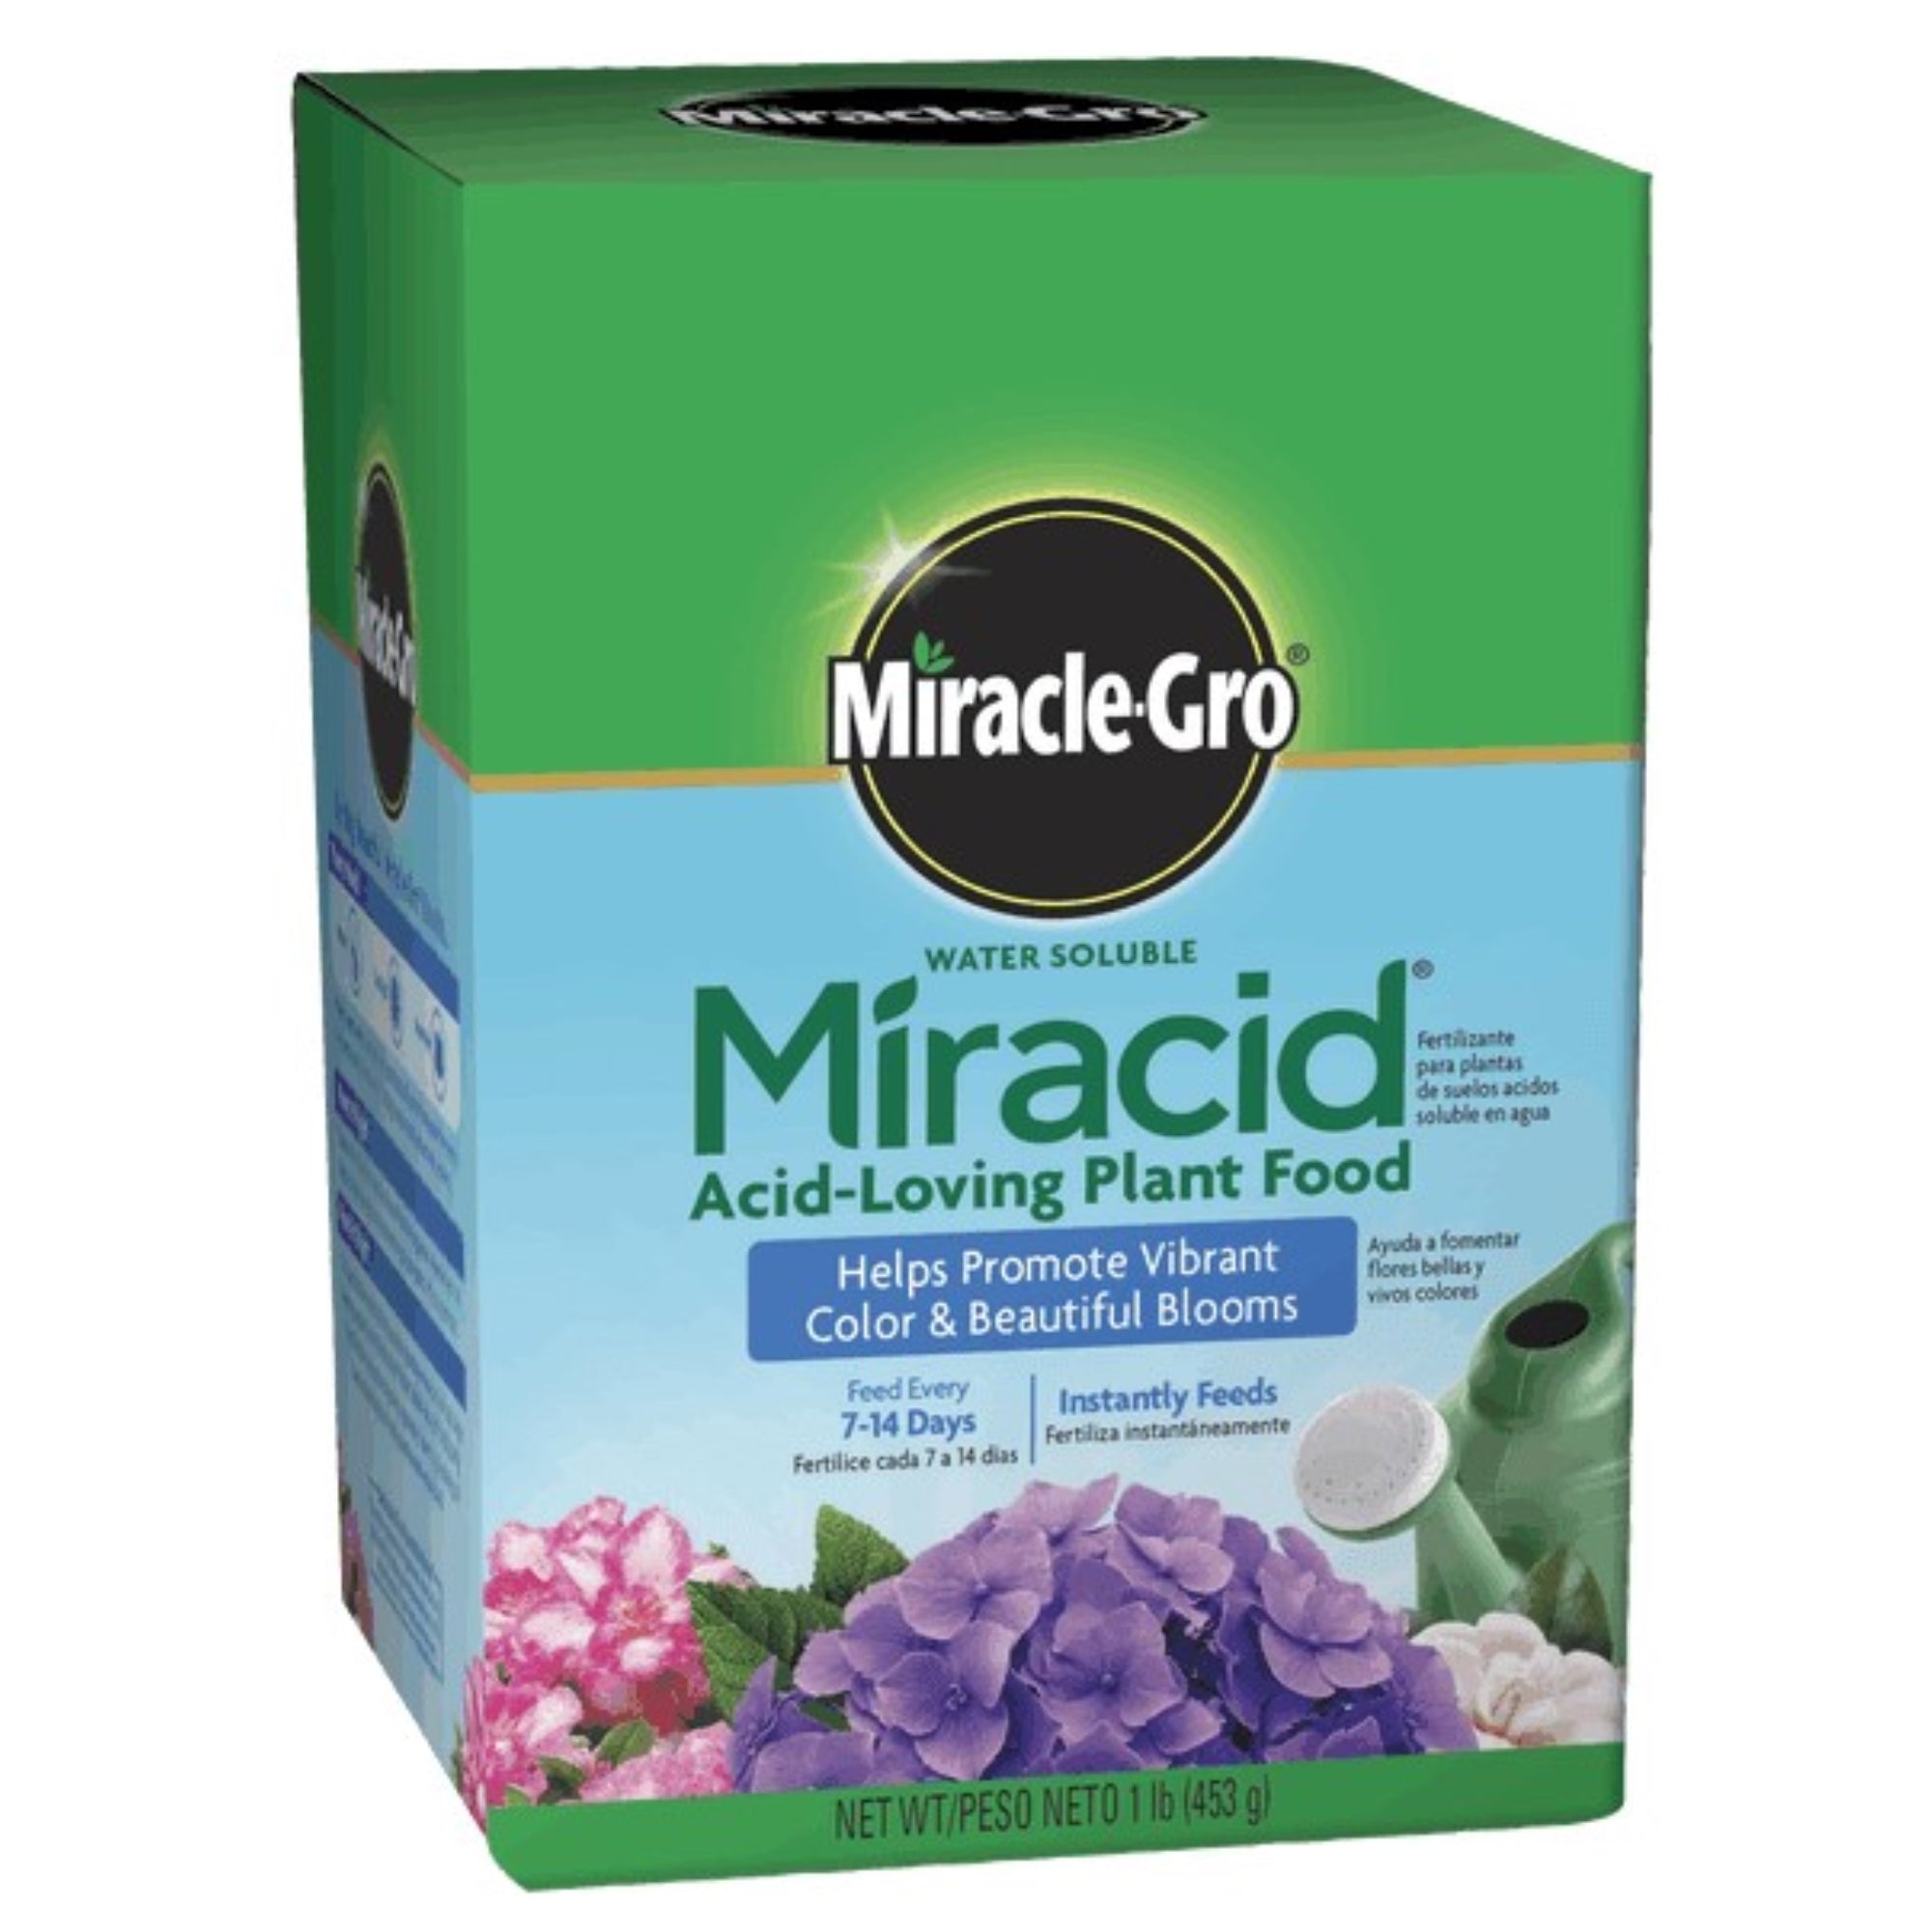 Miracle-Gro Water Soluble Miracid Acid-Loving Plant Food, 1lb